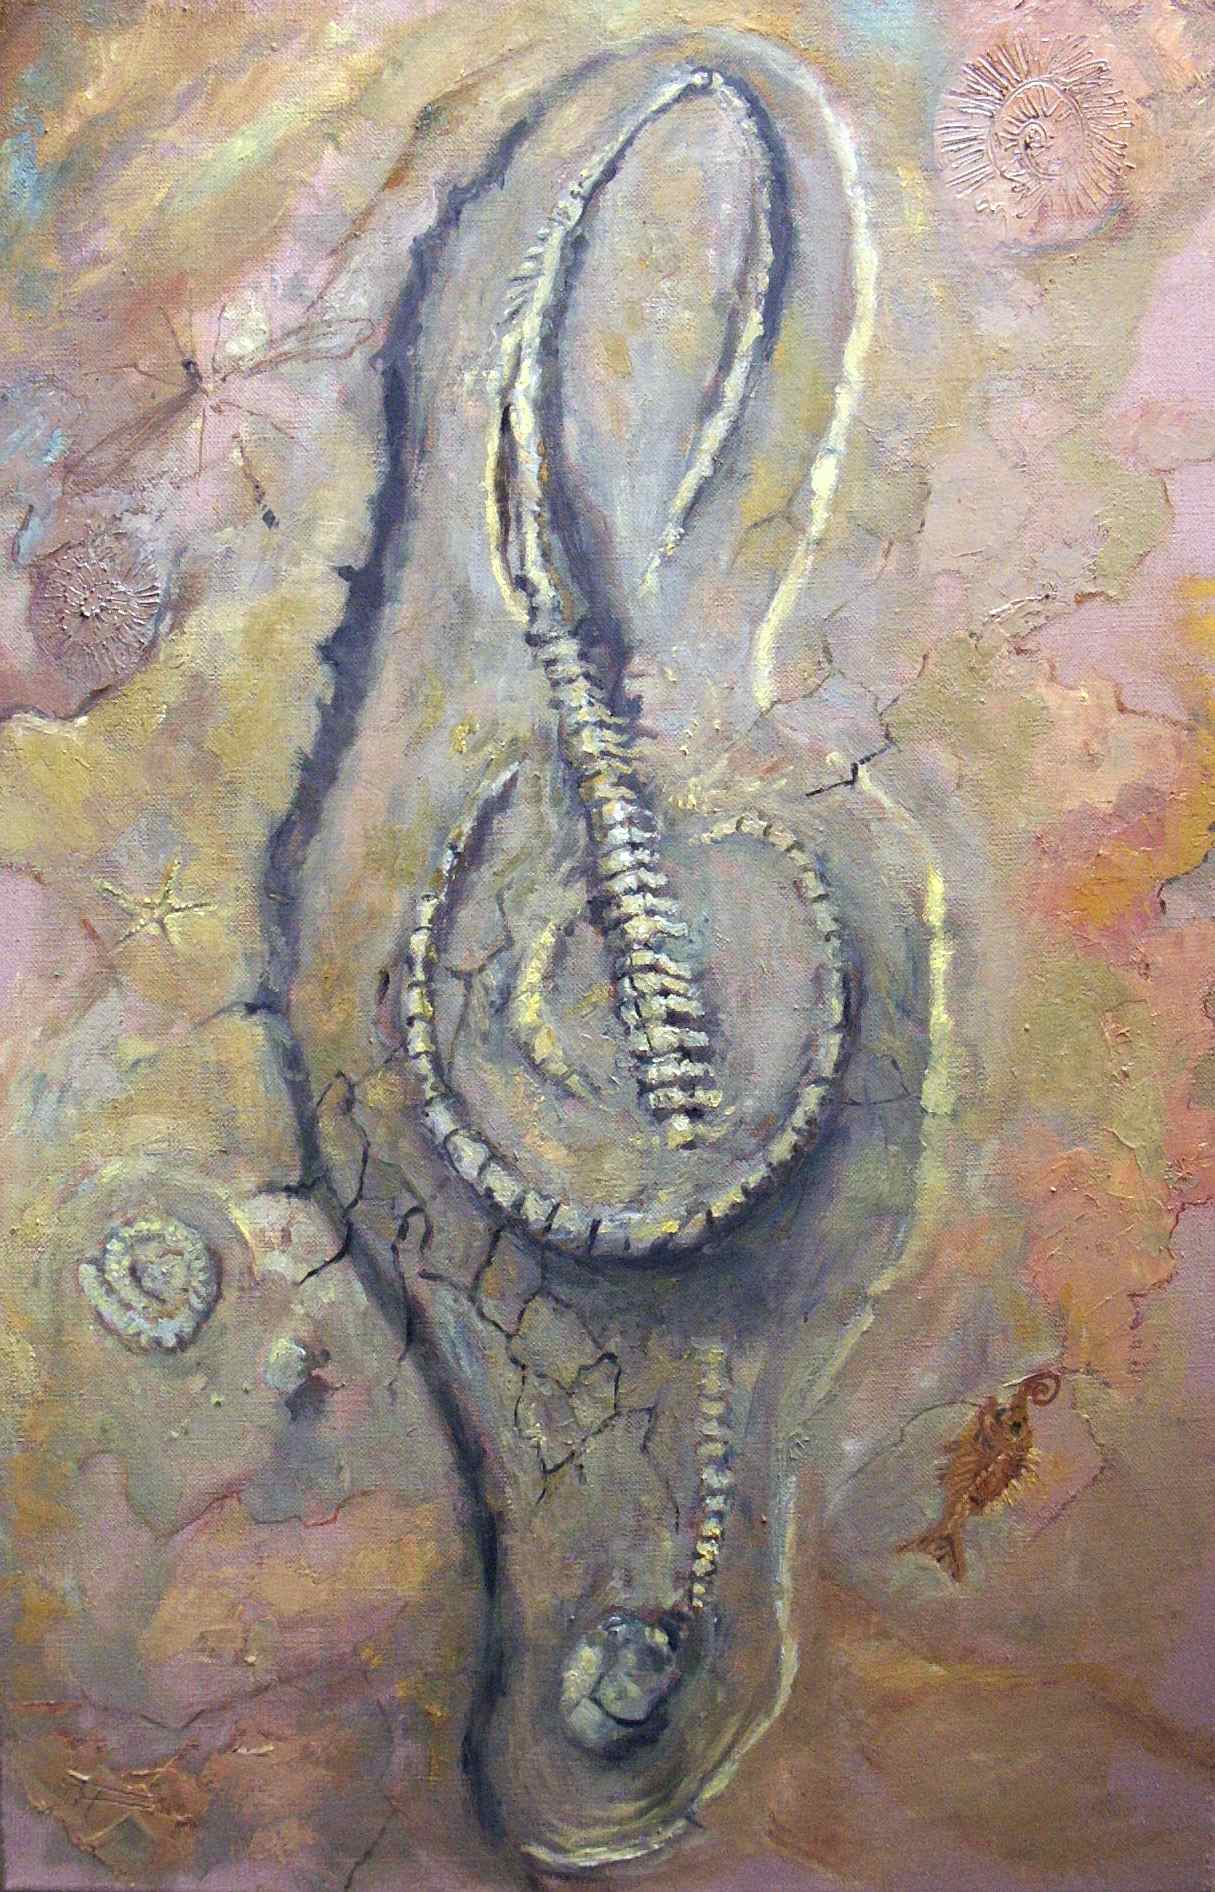 Fossilized Clef&lt;br&gt;&lt;br&gt;